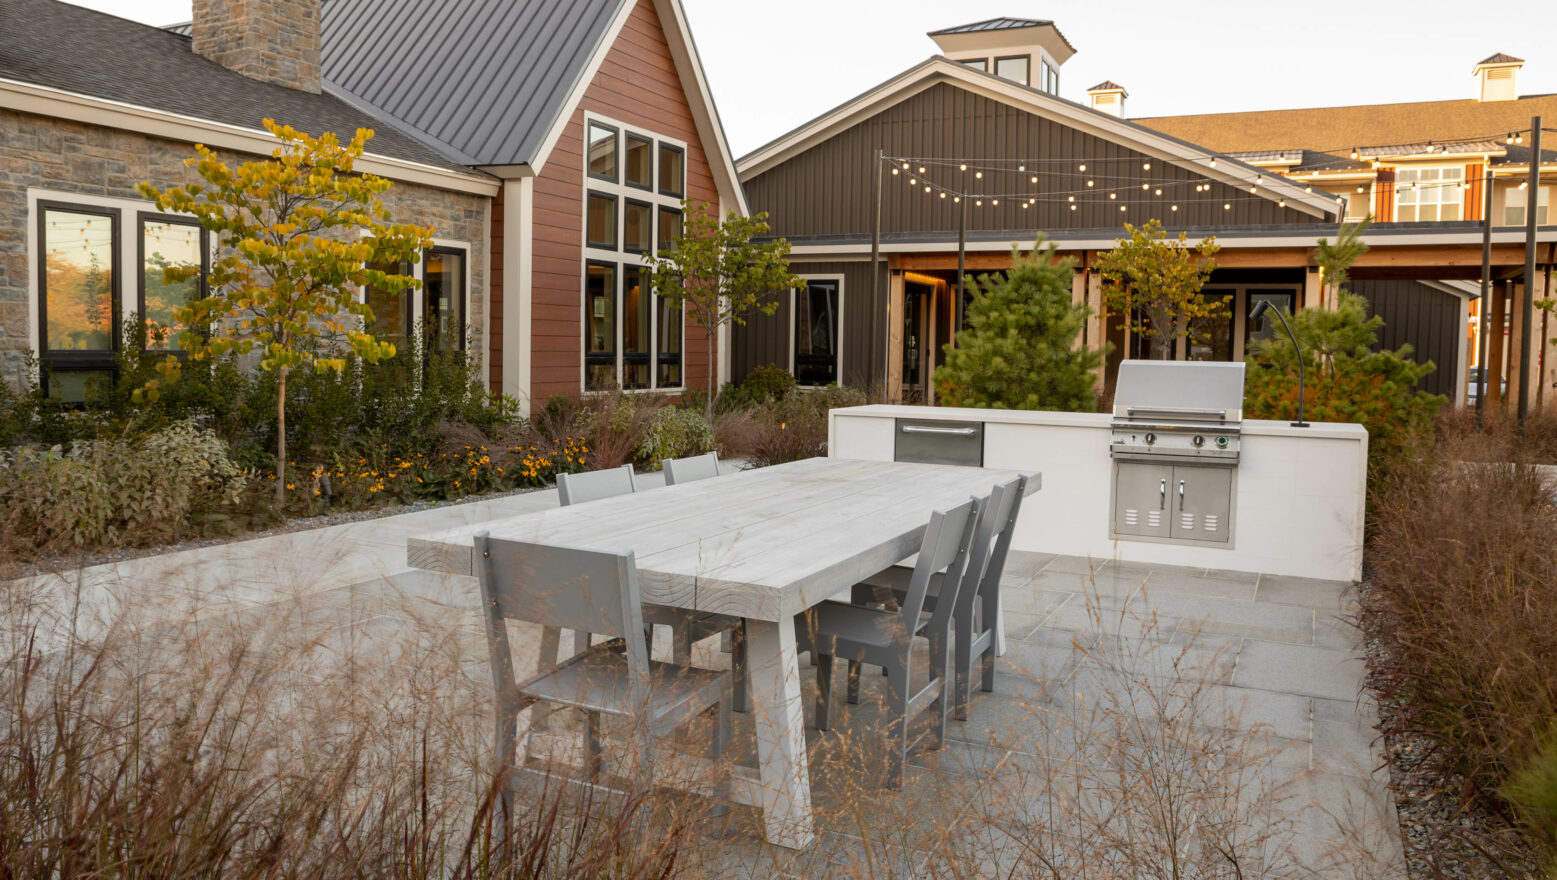 Dining area with table, chairs, and outdoor kitchen at a luxury apartment complex. Dex by Terra Hardscape project in MA.